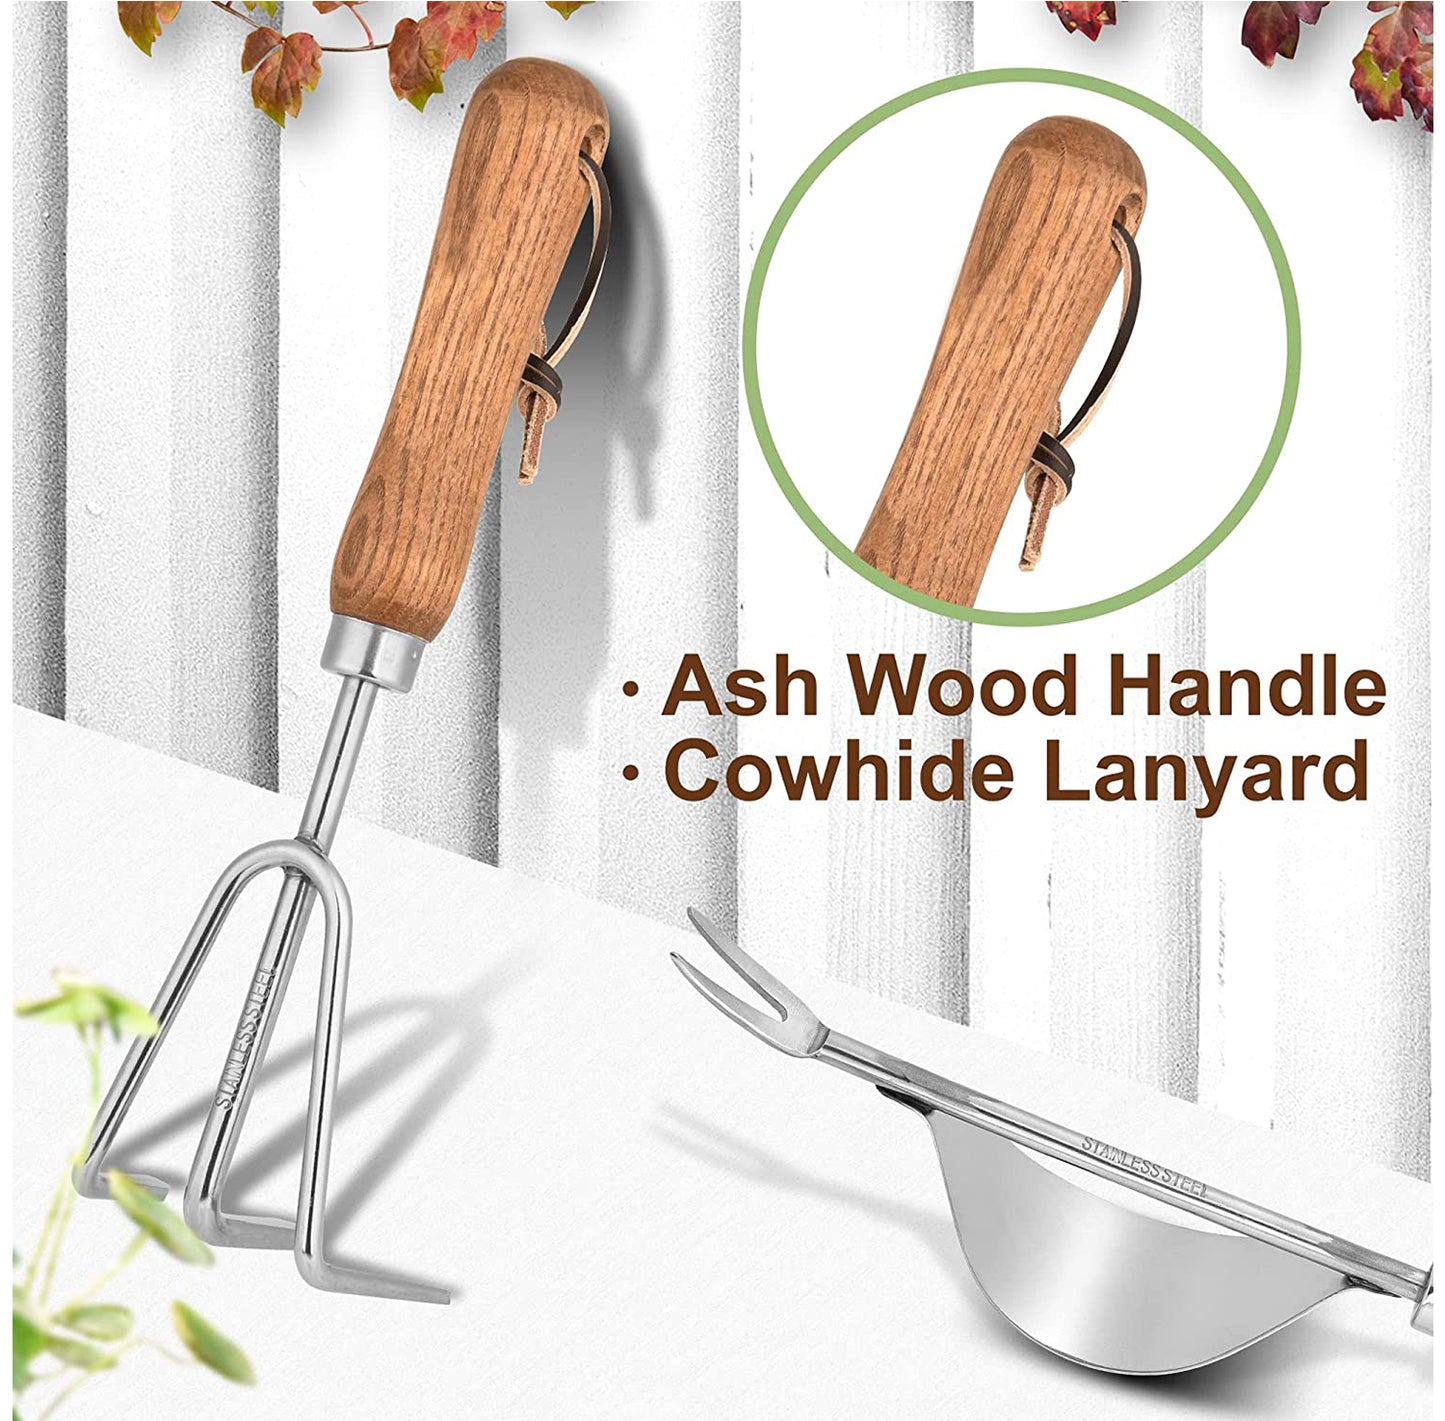 Garden Tools Stainless Steel Tools With Wooden Handle 4-piece Set